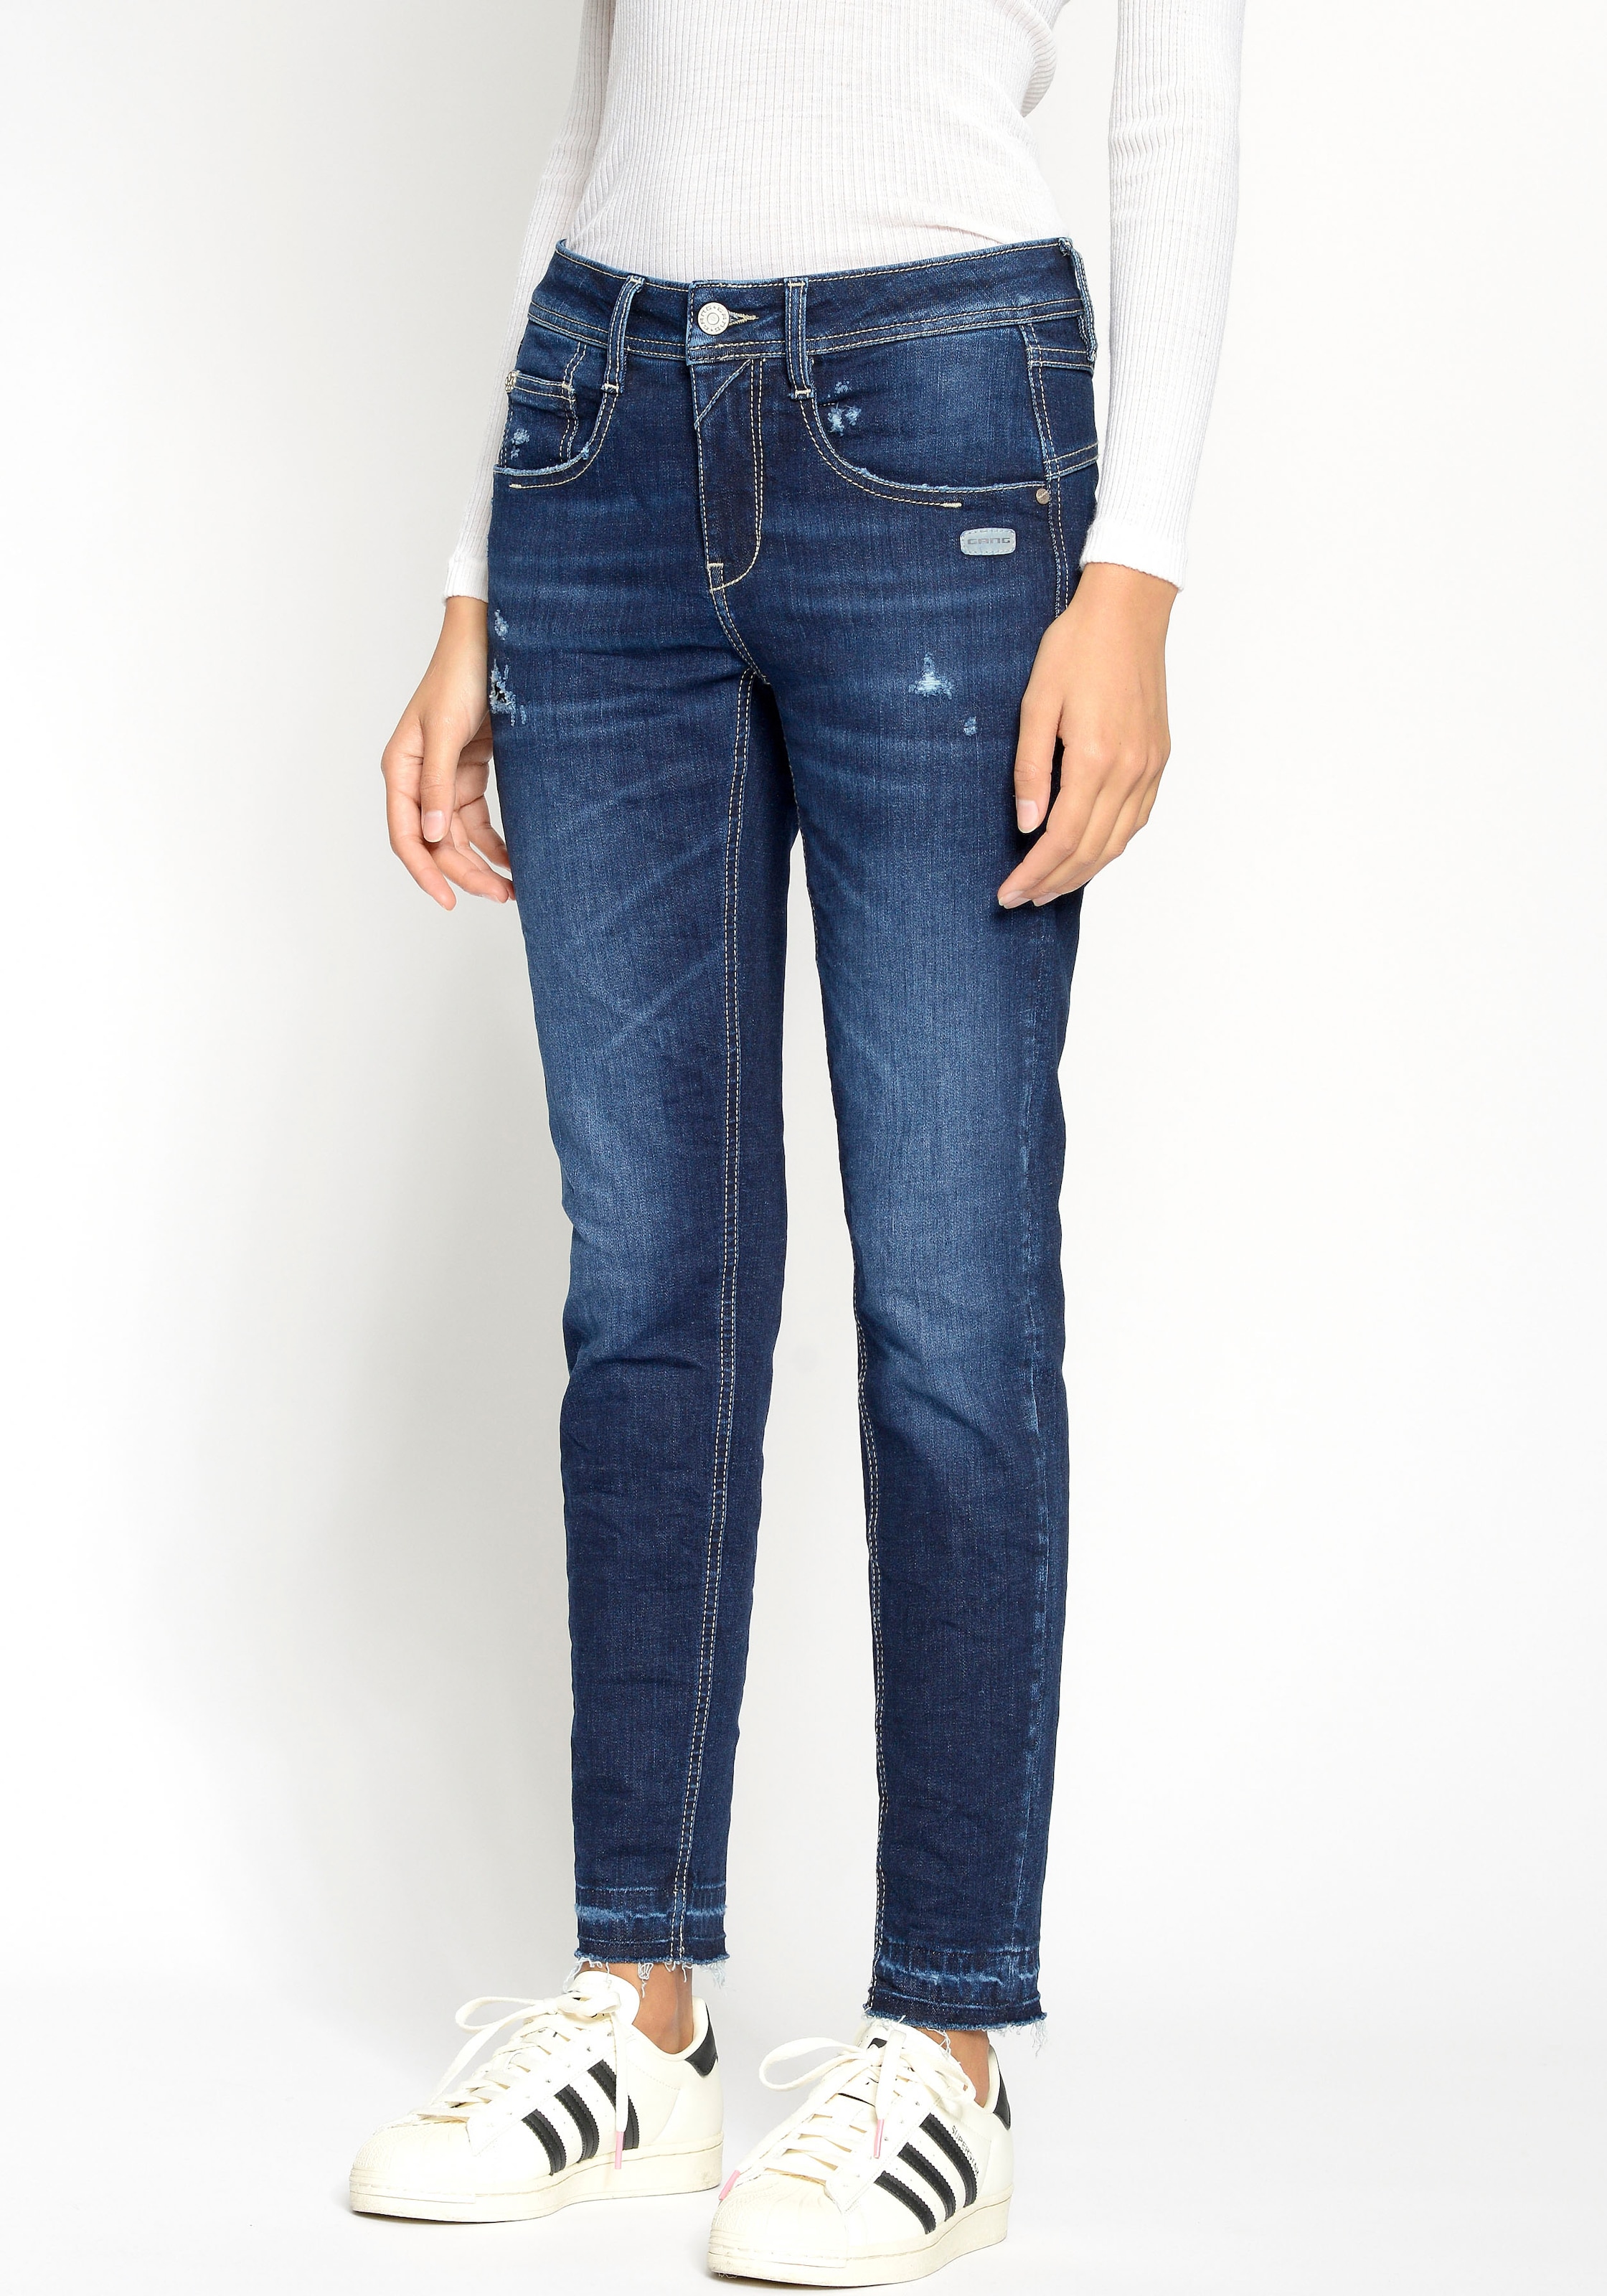 GANG Relax-fit-Jeans »94Amelie OTTO kaufen Cropped« bei